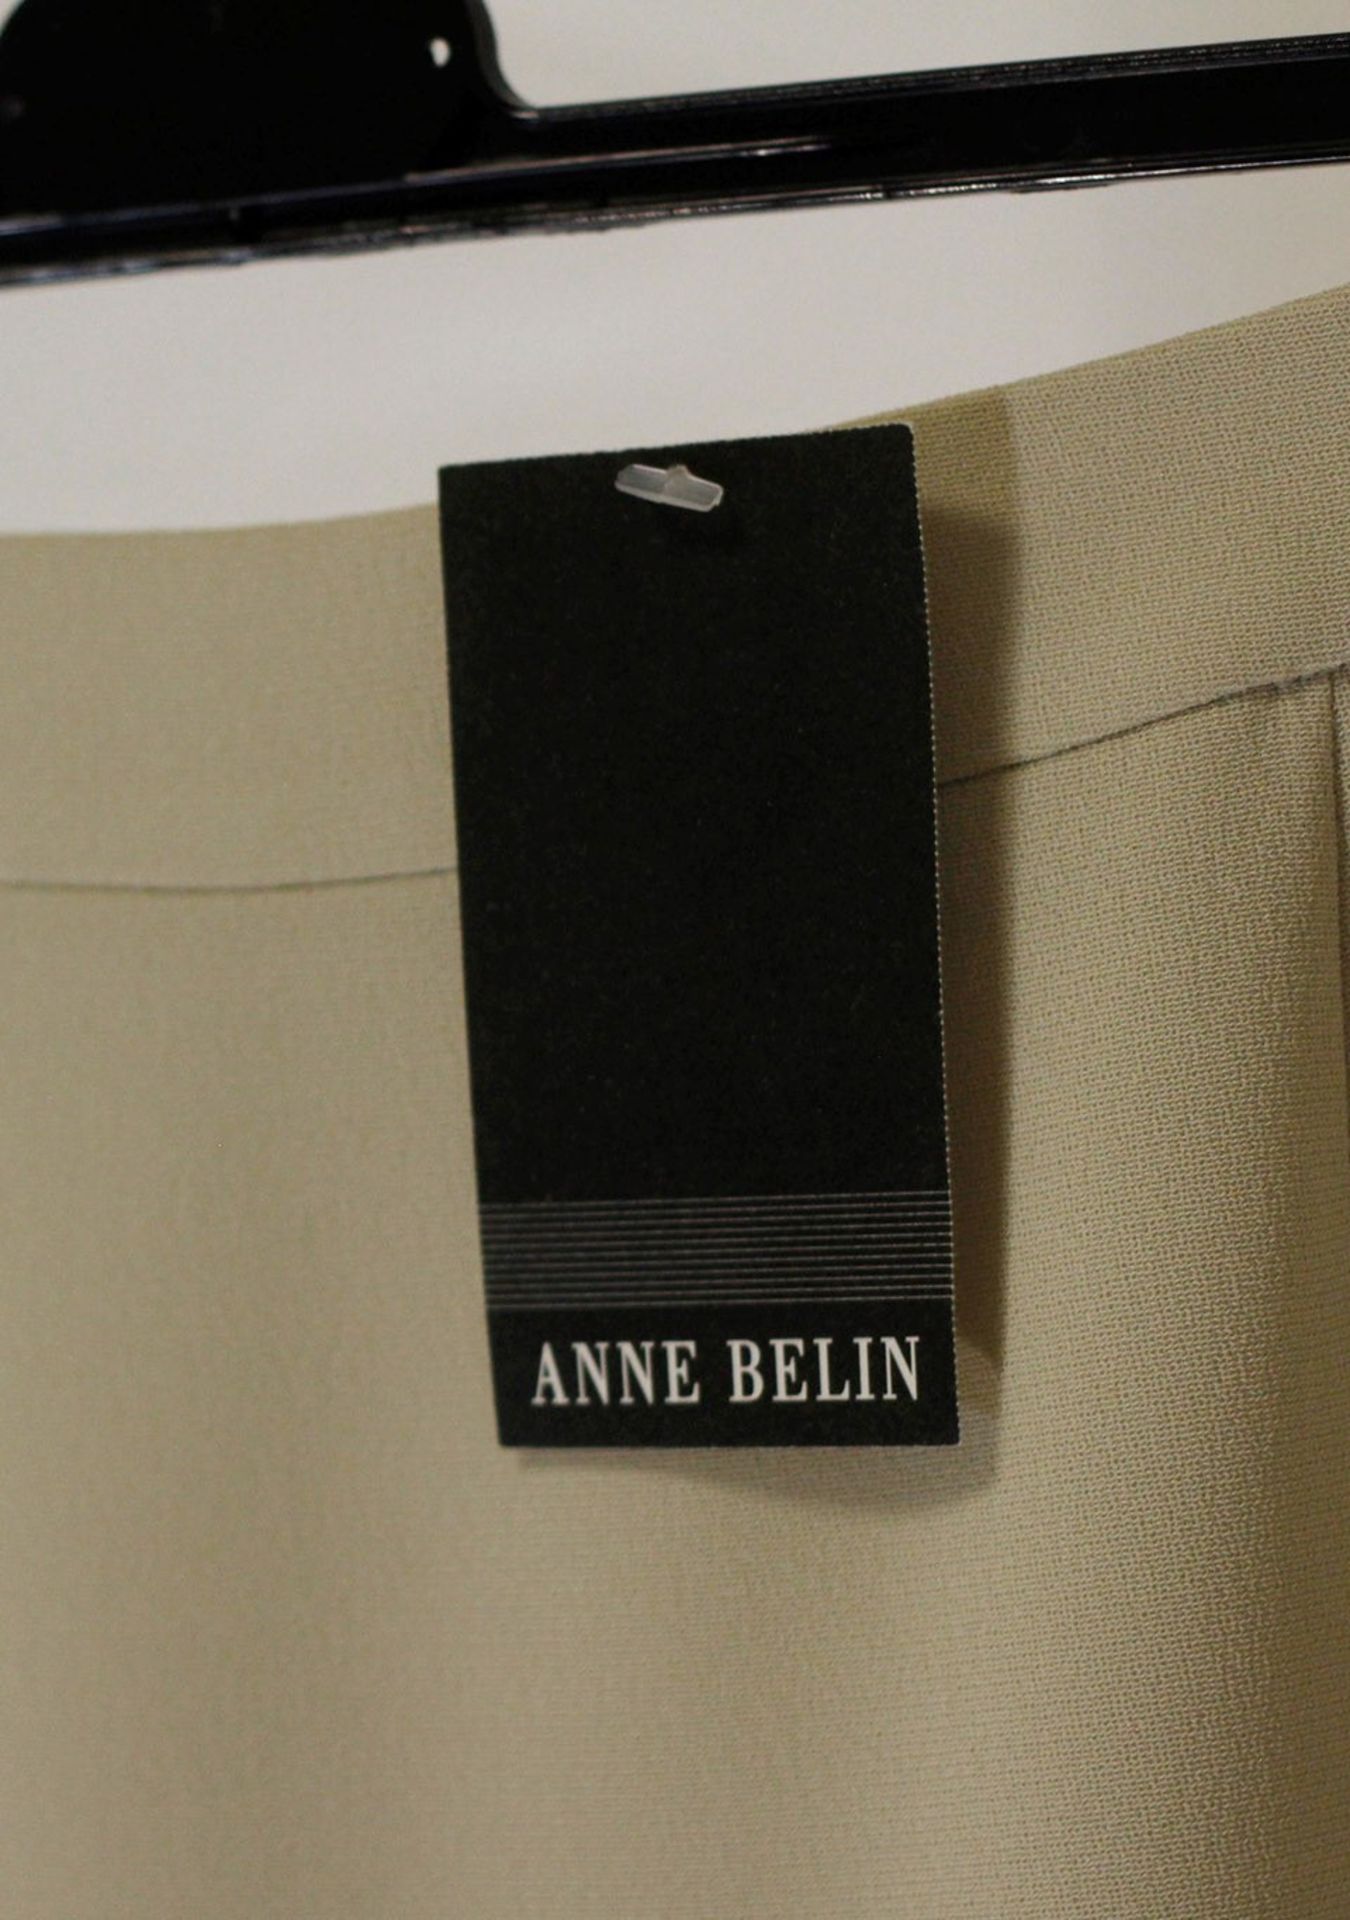 1 x Anne Belin Pistachio Skirt - Size: 16 - Material: 100% Polyester - From a High End Clothing - Image 8 of 11